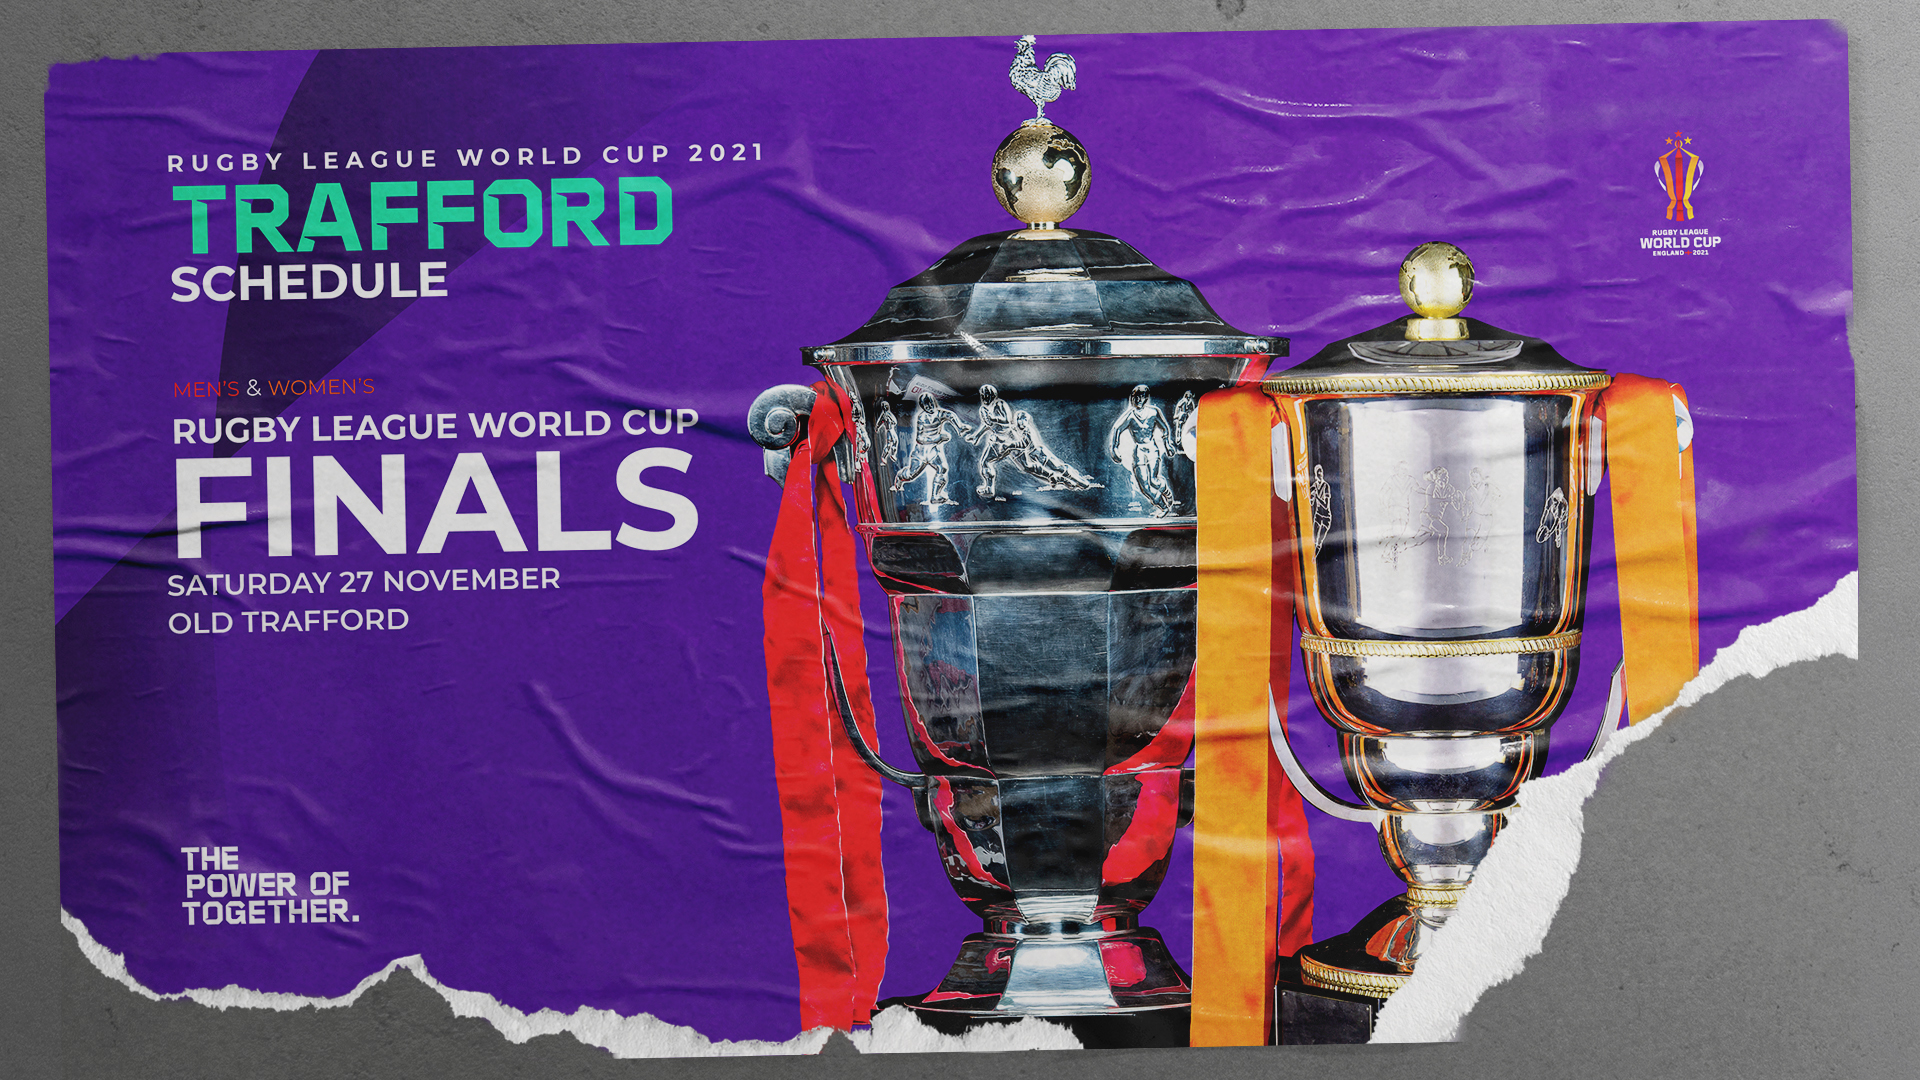 Trafford's Rugby League World Cup 2021 fixtures revealed